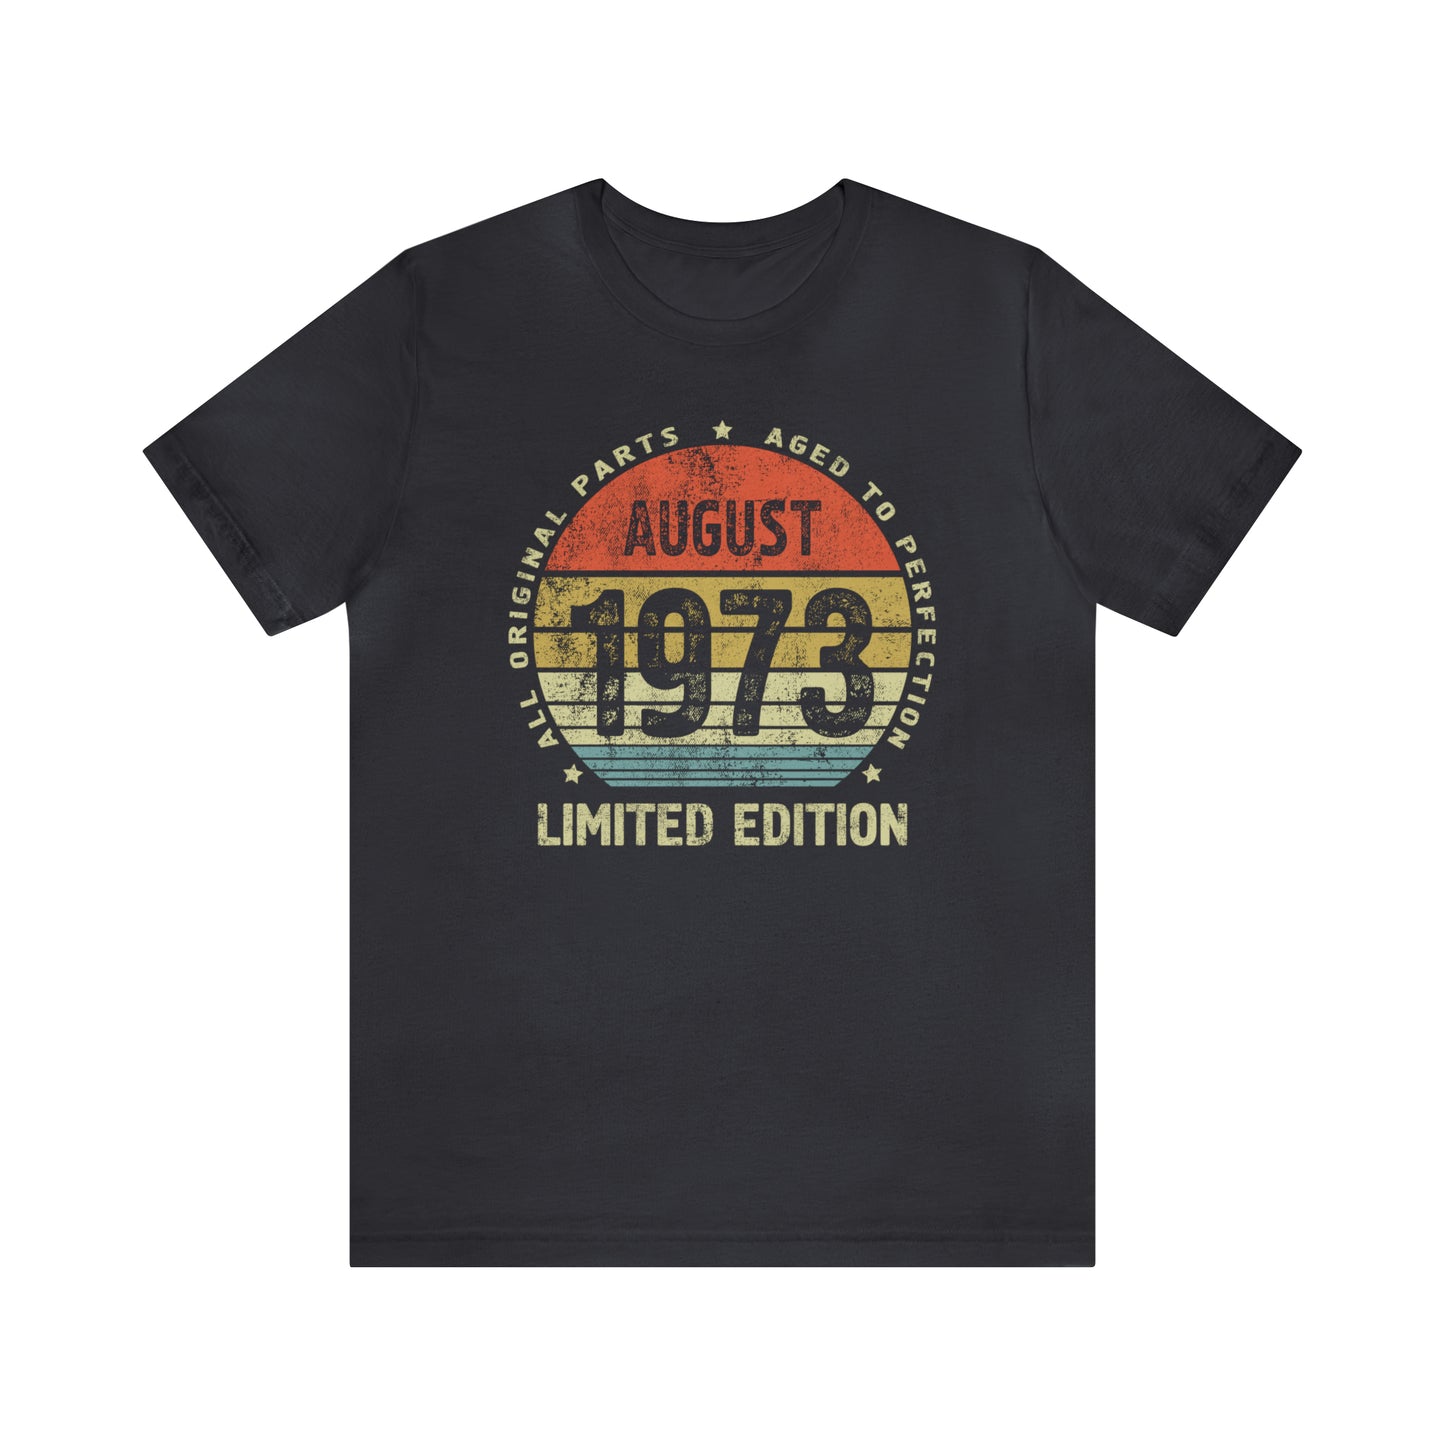 August 1973 birthday shirt for men or women, Gift shirt for sister or brother